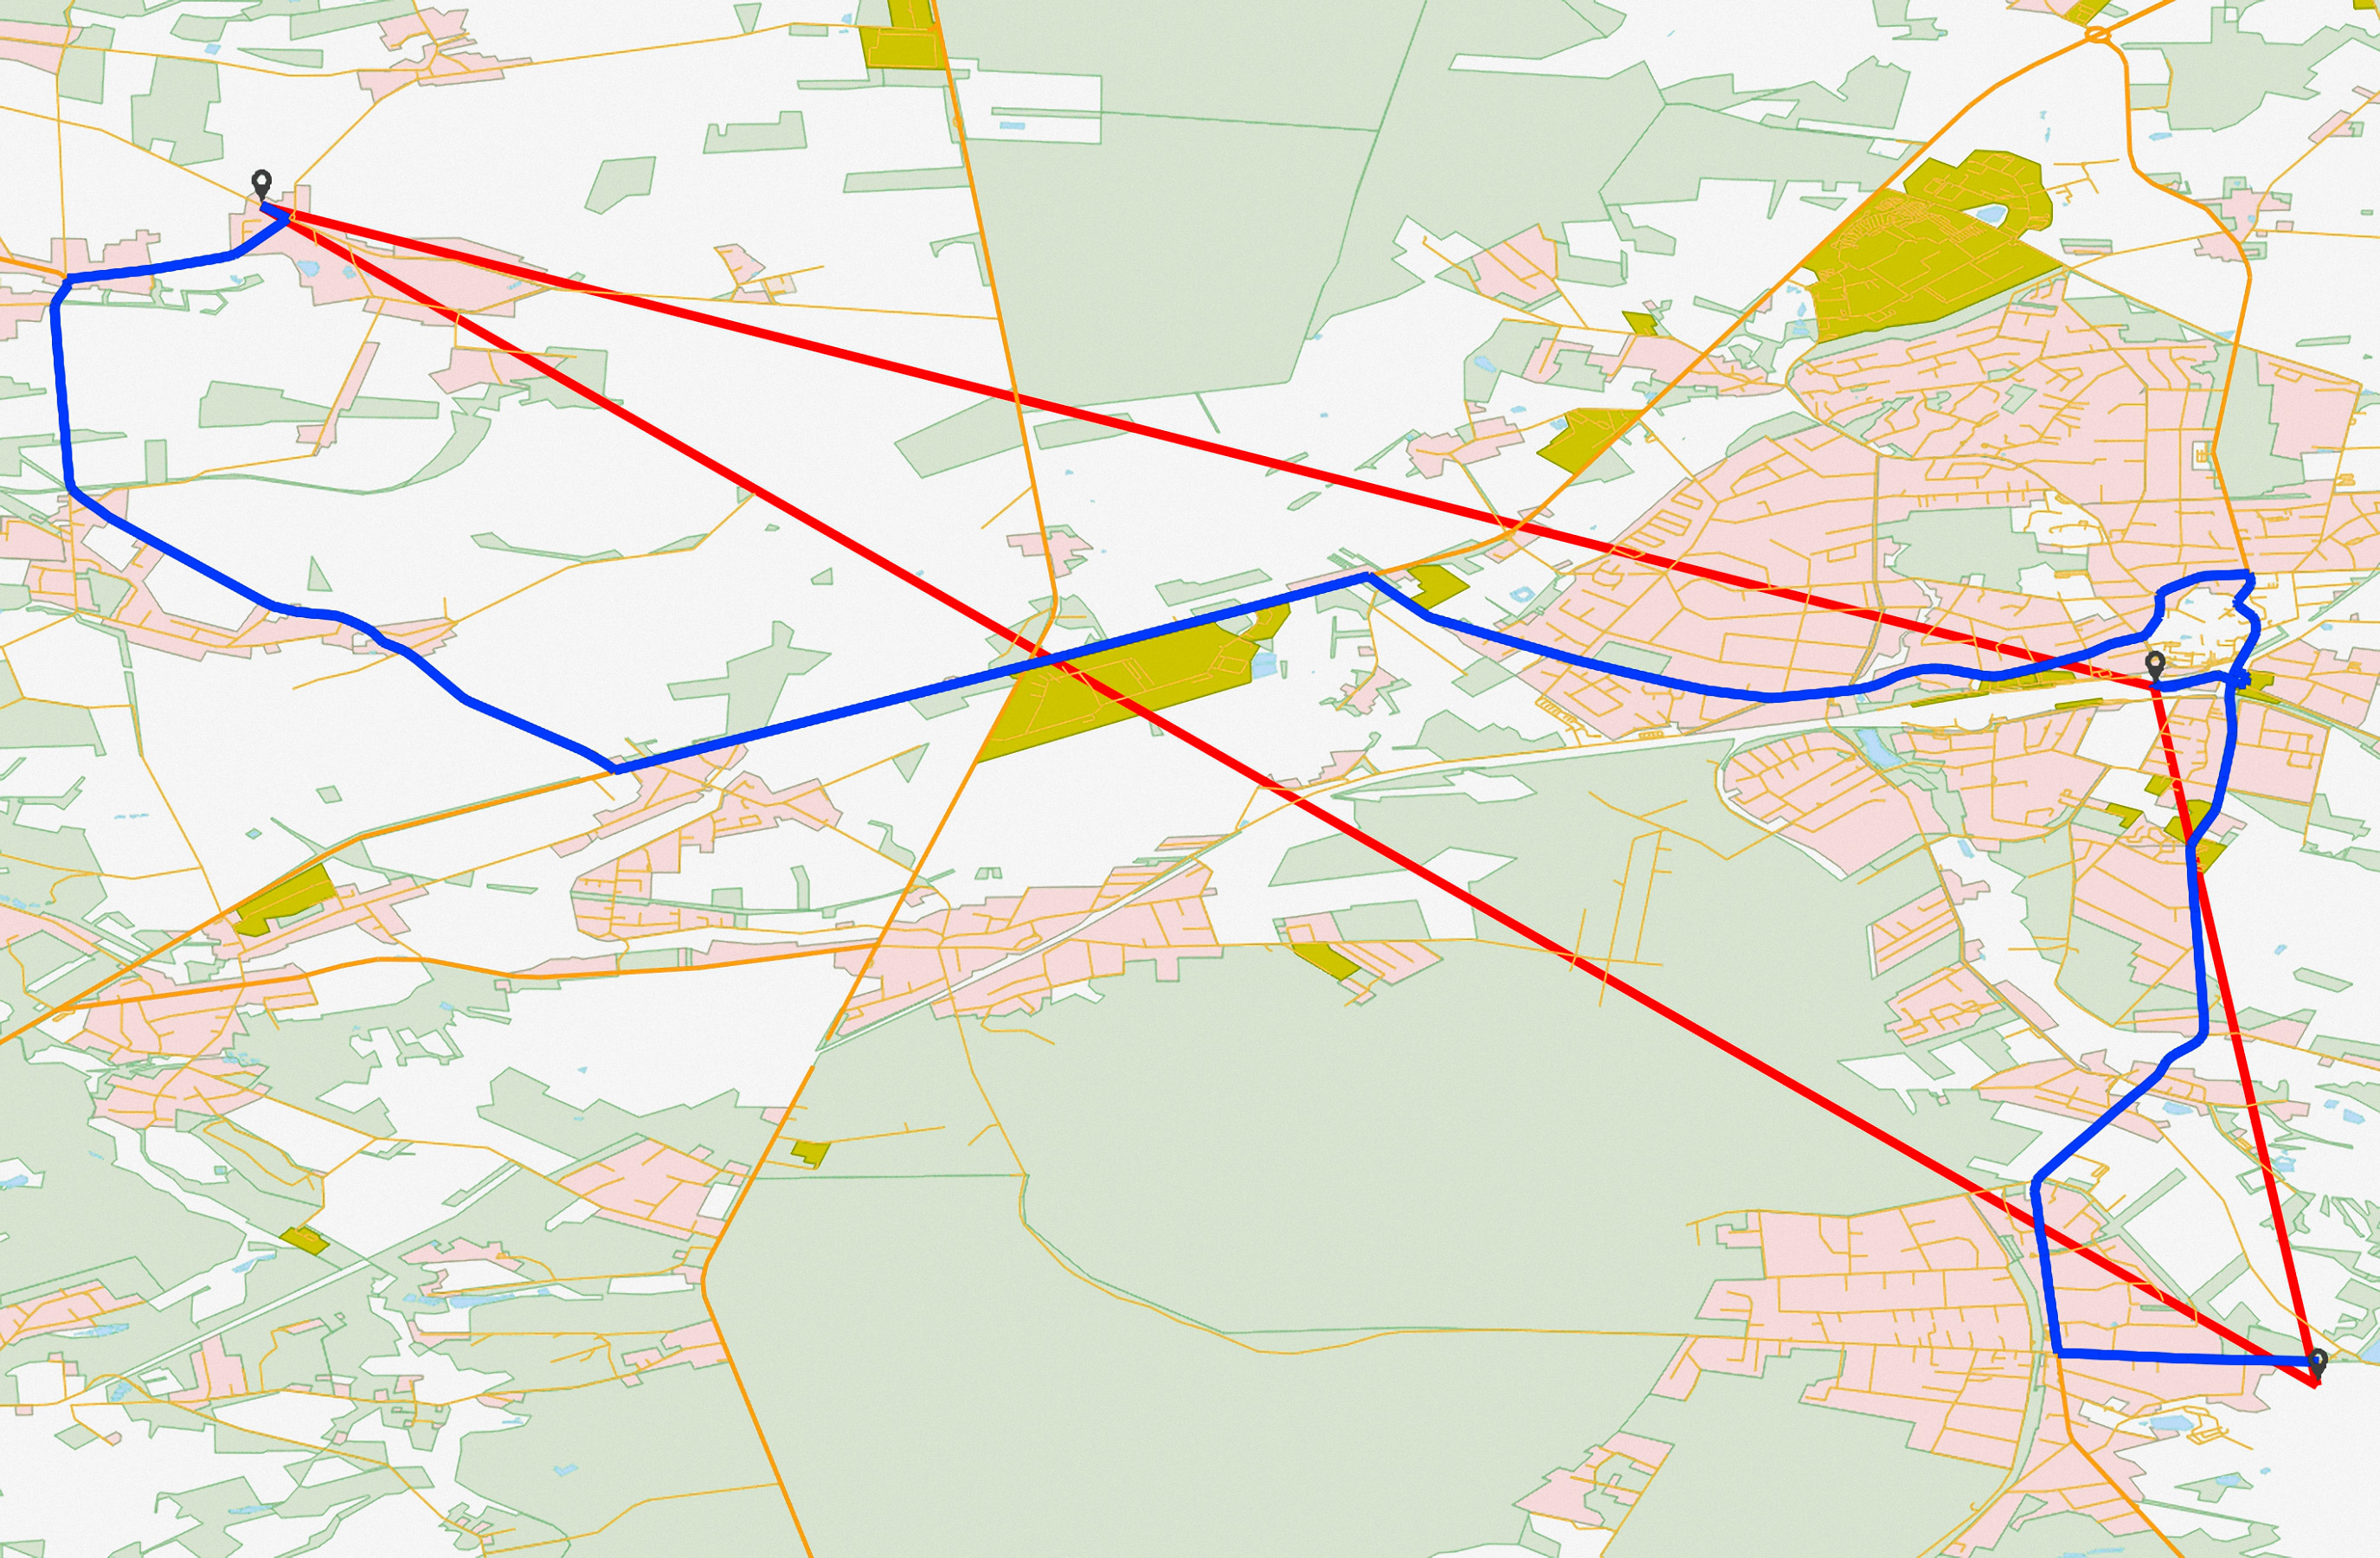 Example of a Route for Commuters